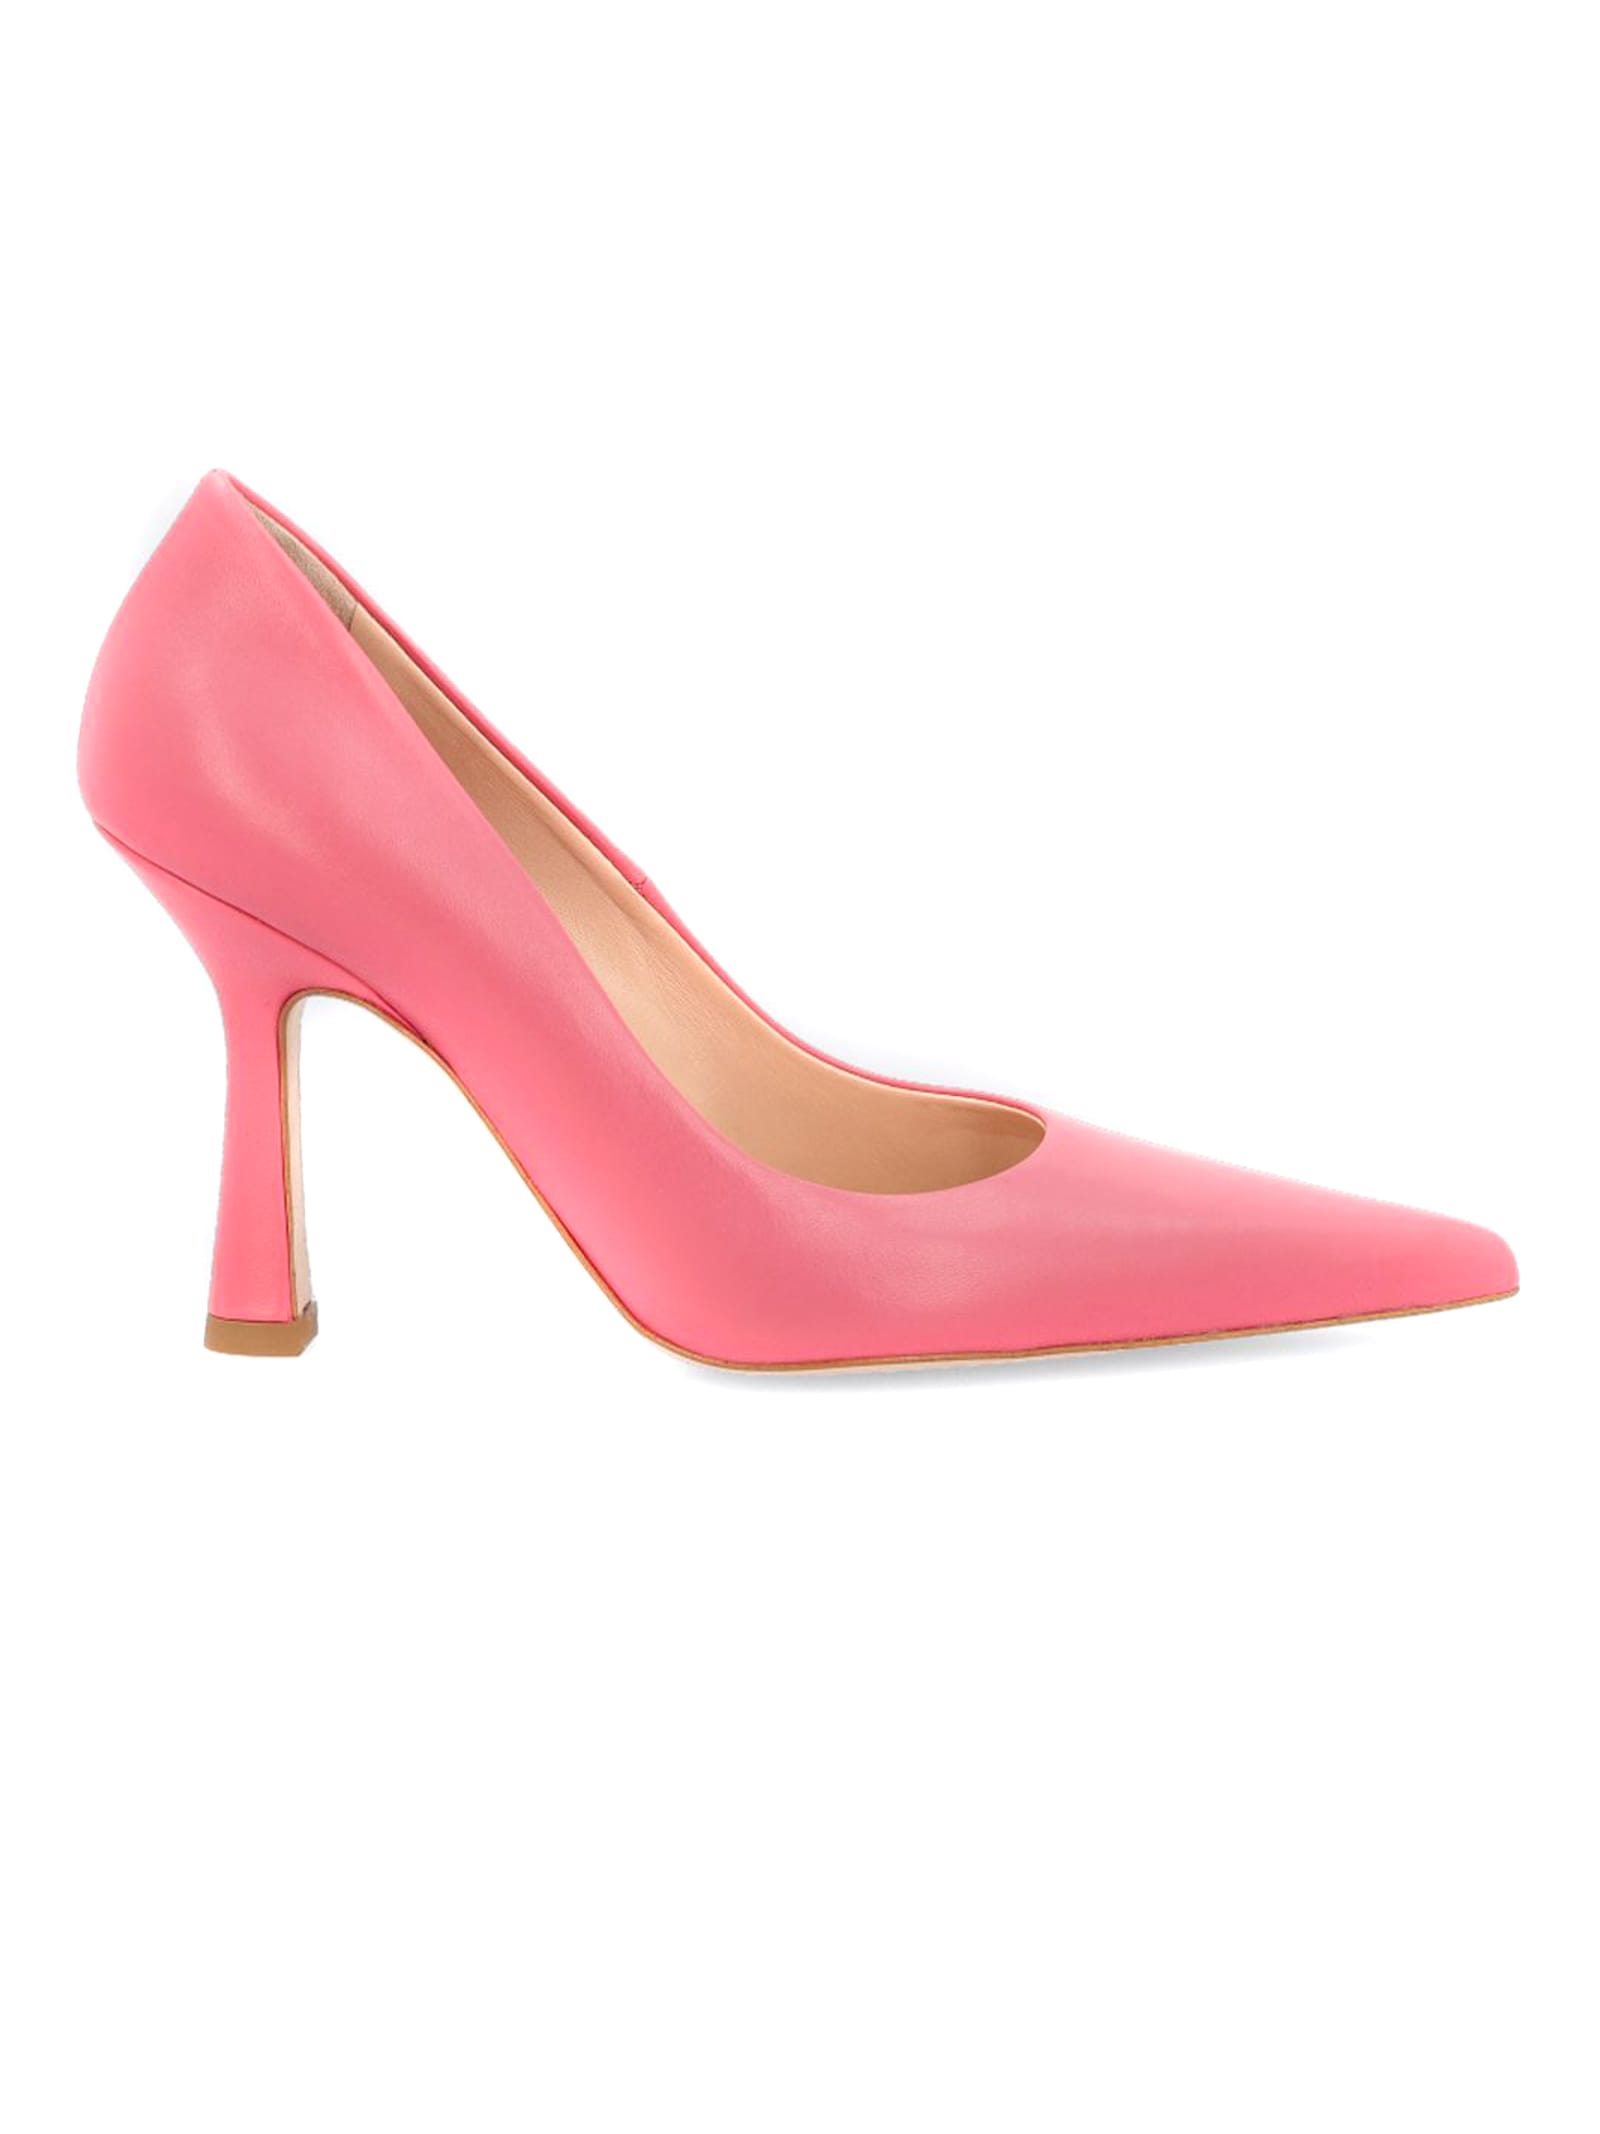 Leonie Hanne Pink Leather Court Shoes In Rosa | ModeSens